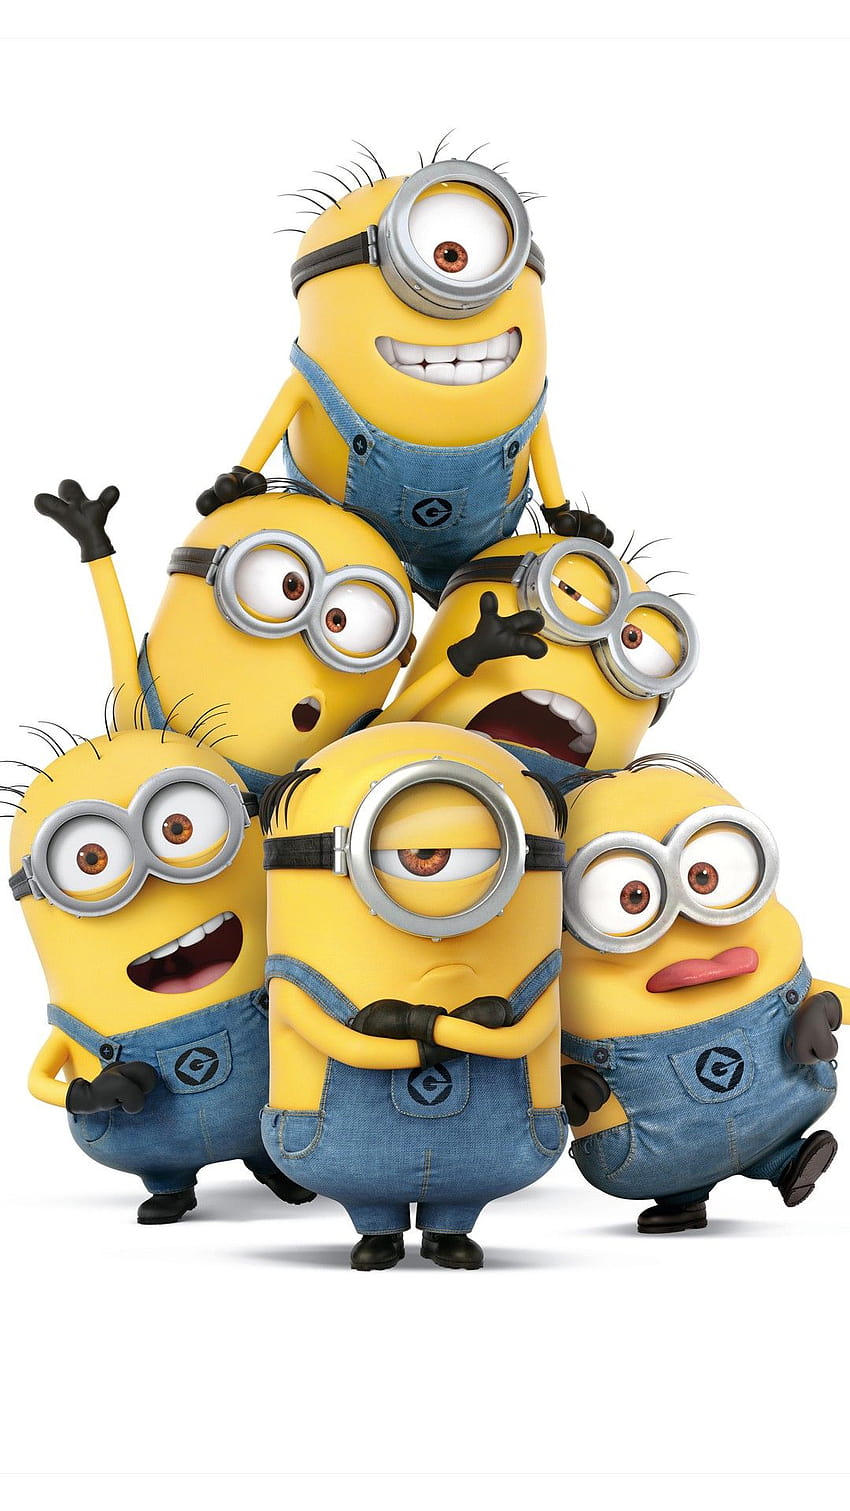 Despicable Me 3 Minions, android minions full HD phone wallpaper